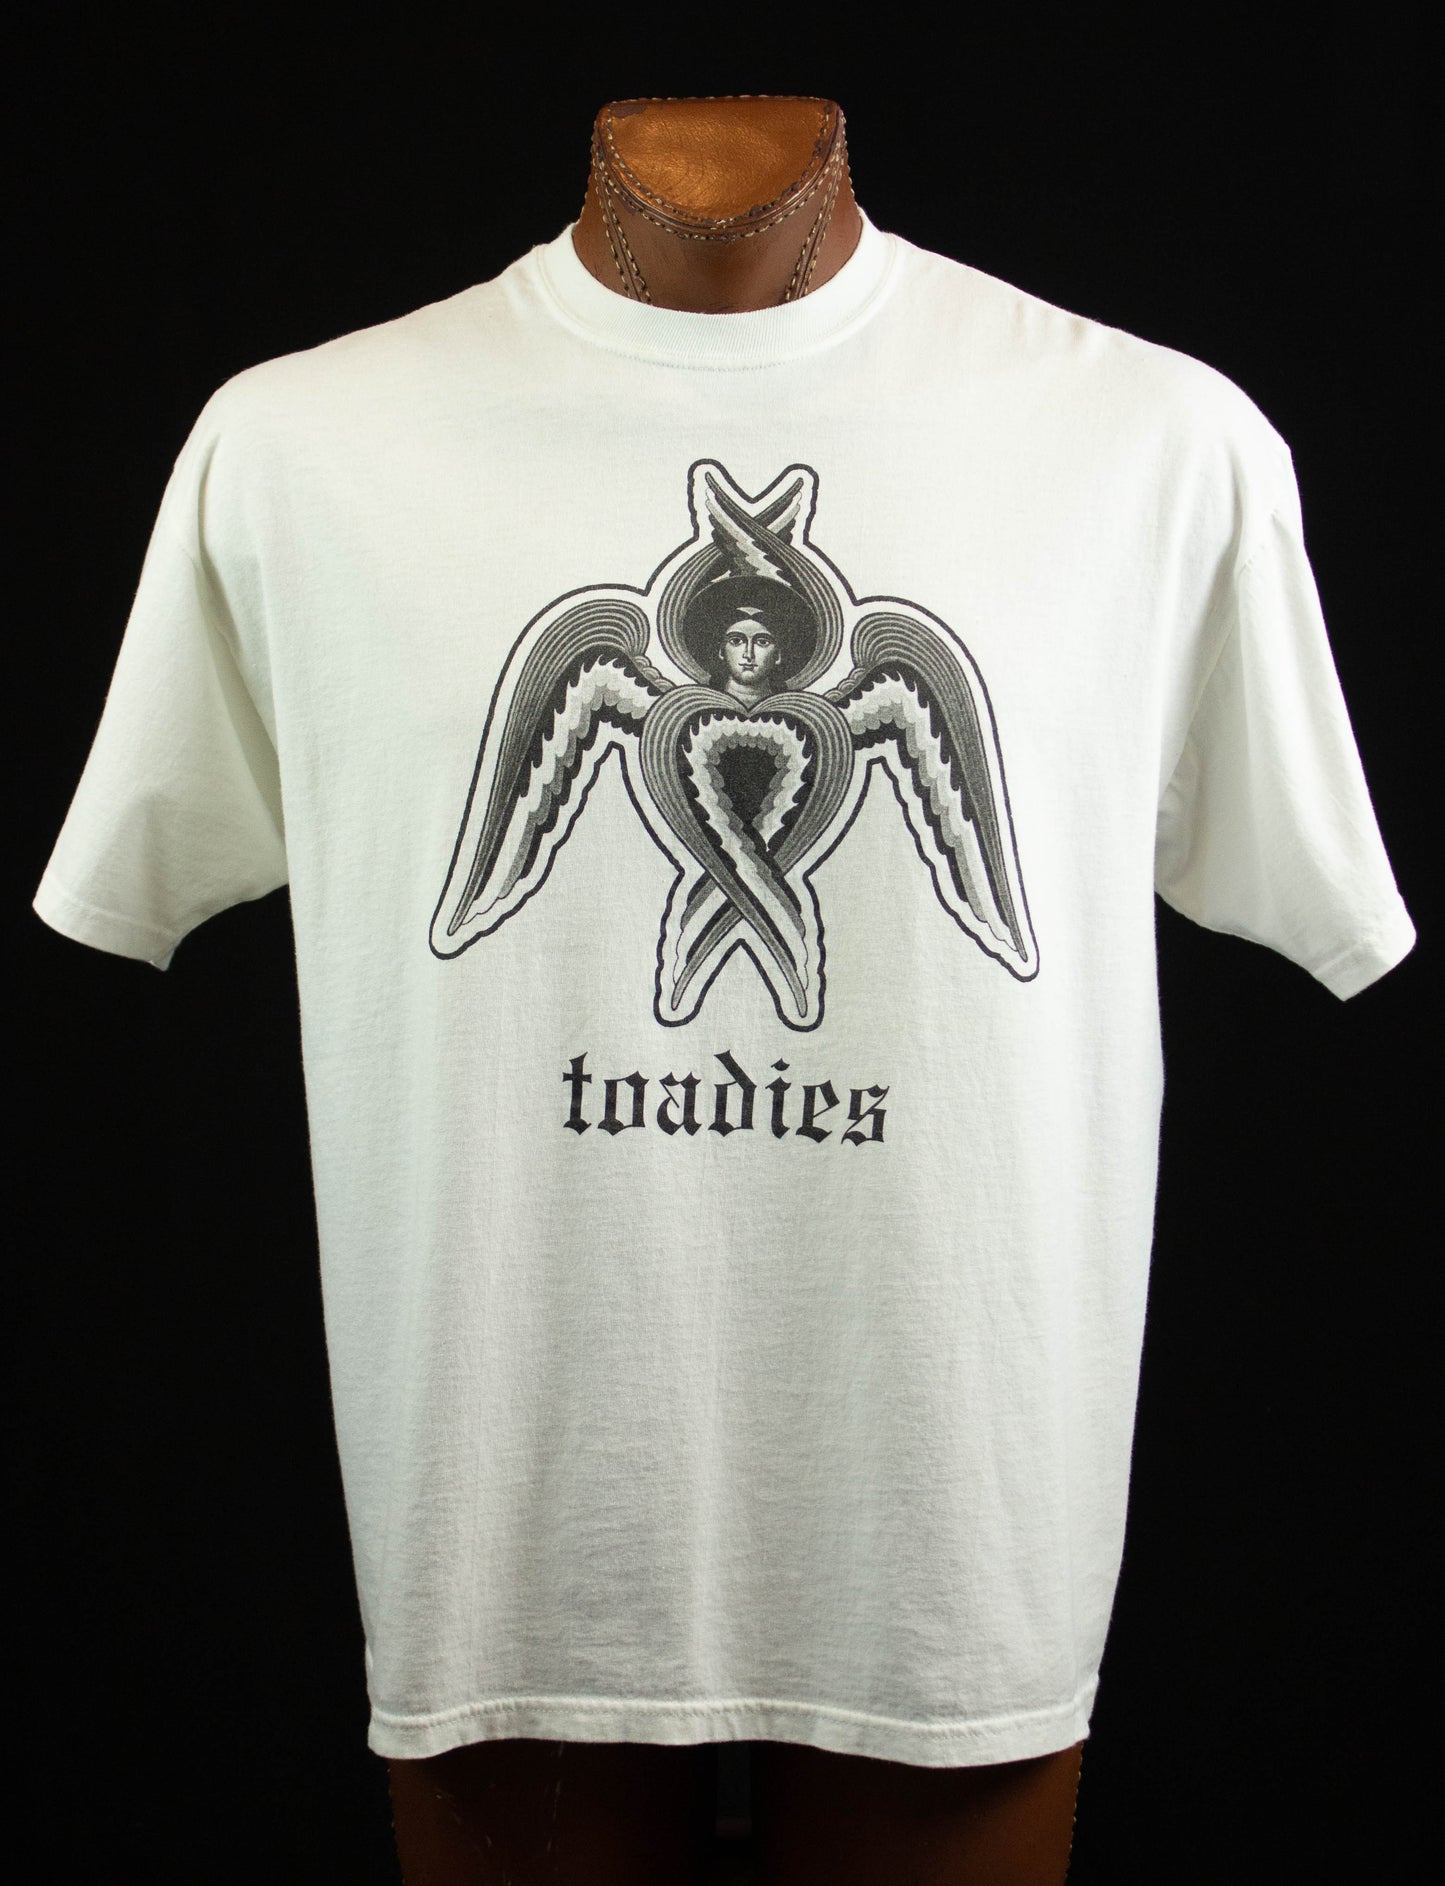 Vintage Toadies Concert T Shirt 2001 Hell Below/Stars Above Album Promo White and Black XL